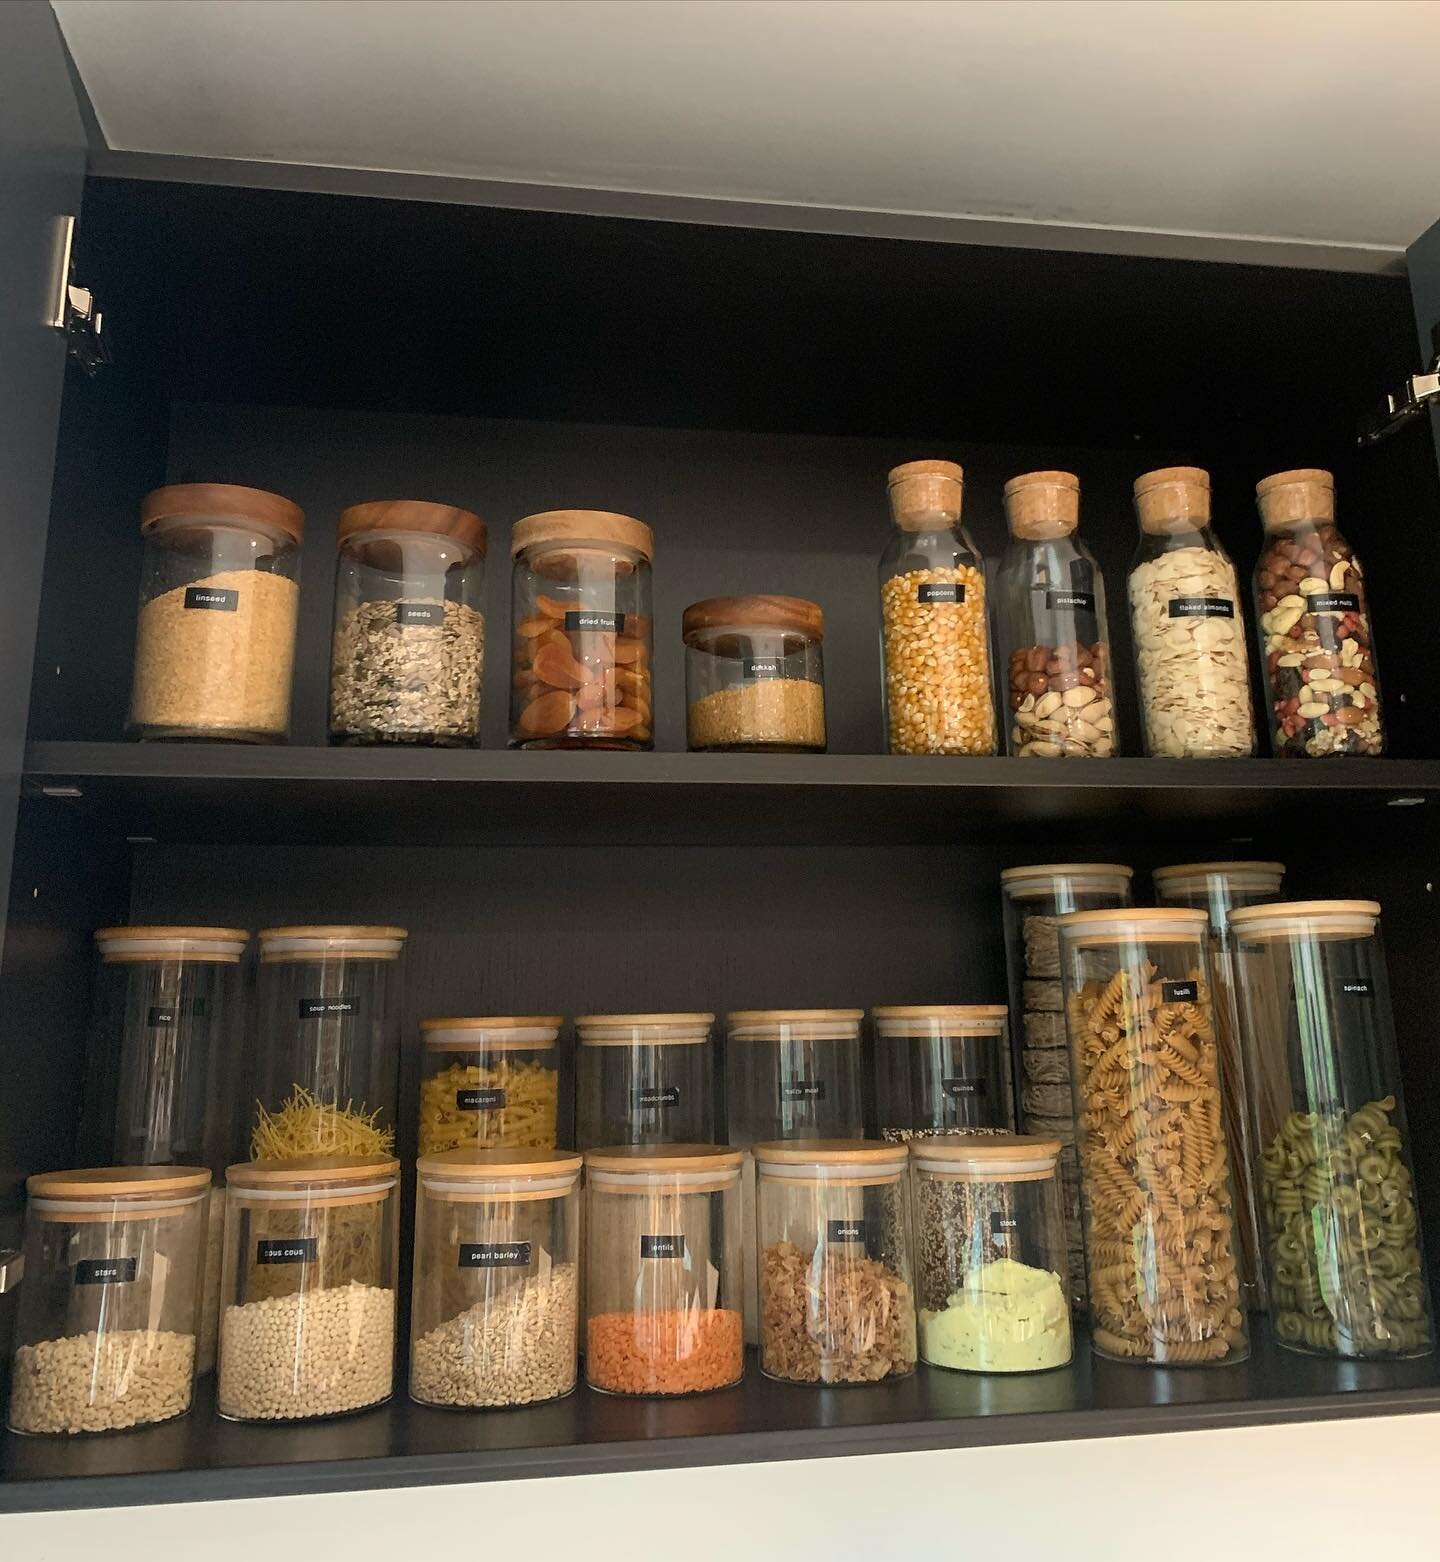 Anyone else getting a little bored of cooking now 🙈
I figured I needed to update my cupboard of dreams and add some jars for all the extra ingredients in the hope that it inspires me to actually cook one of the 100 recipes ive saved from @gingrkitch